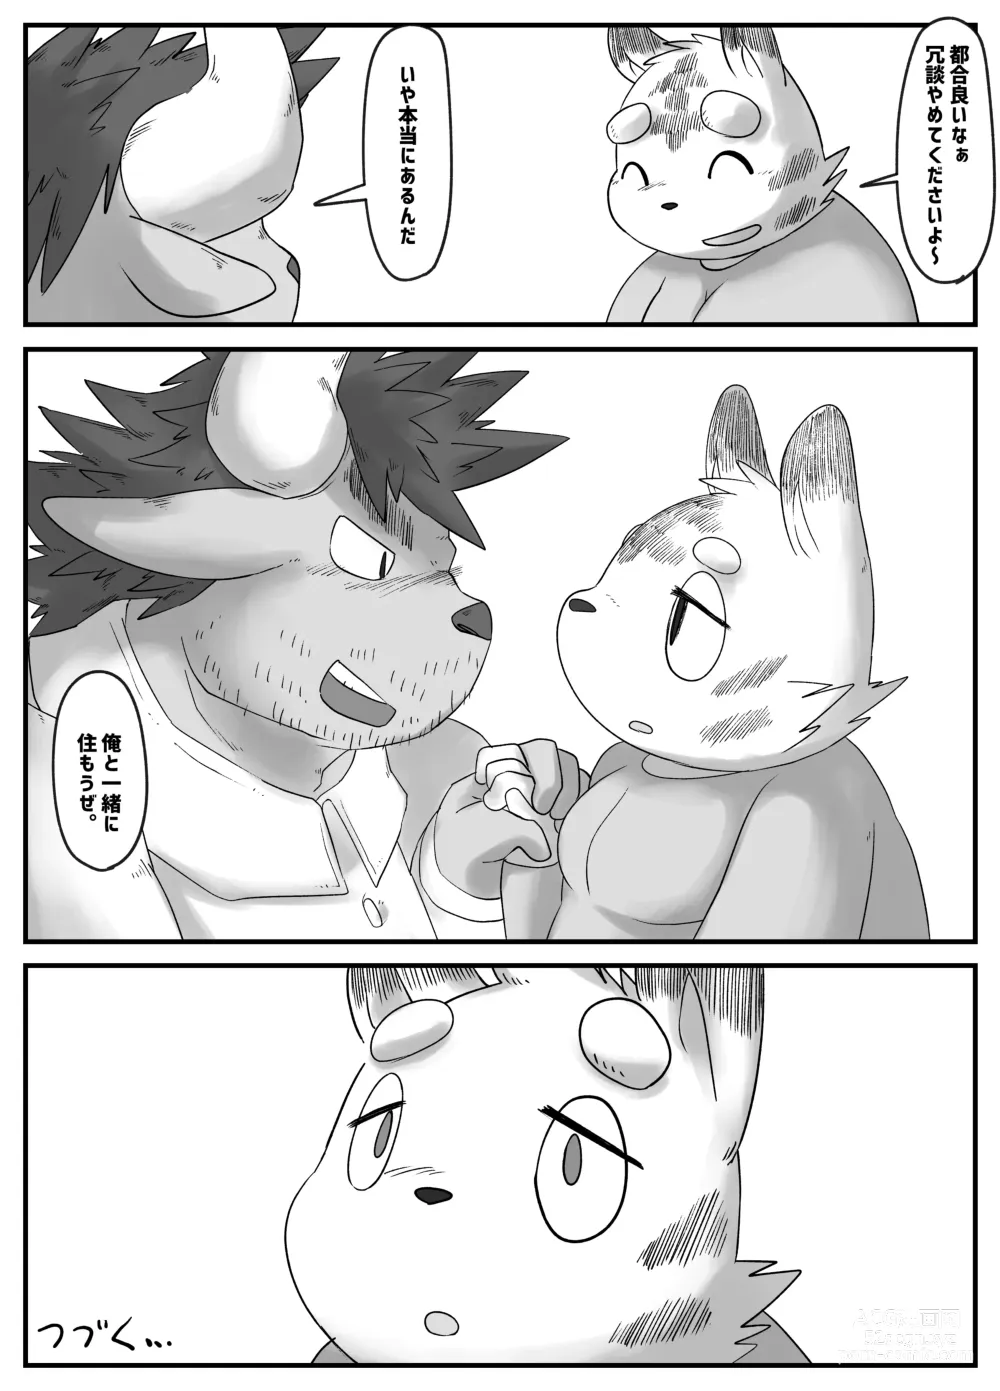 Page 32 of doujinshi Muscular Bull Teacher & Chubby Tiger Student 4